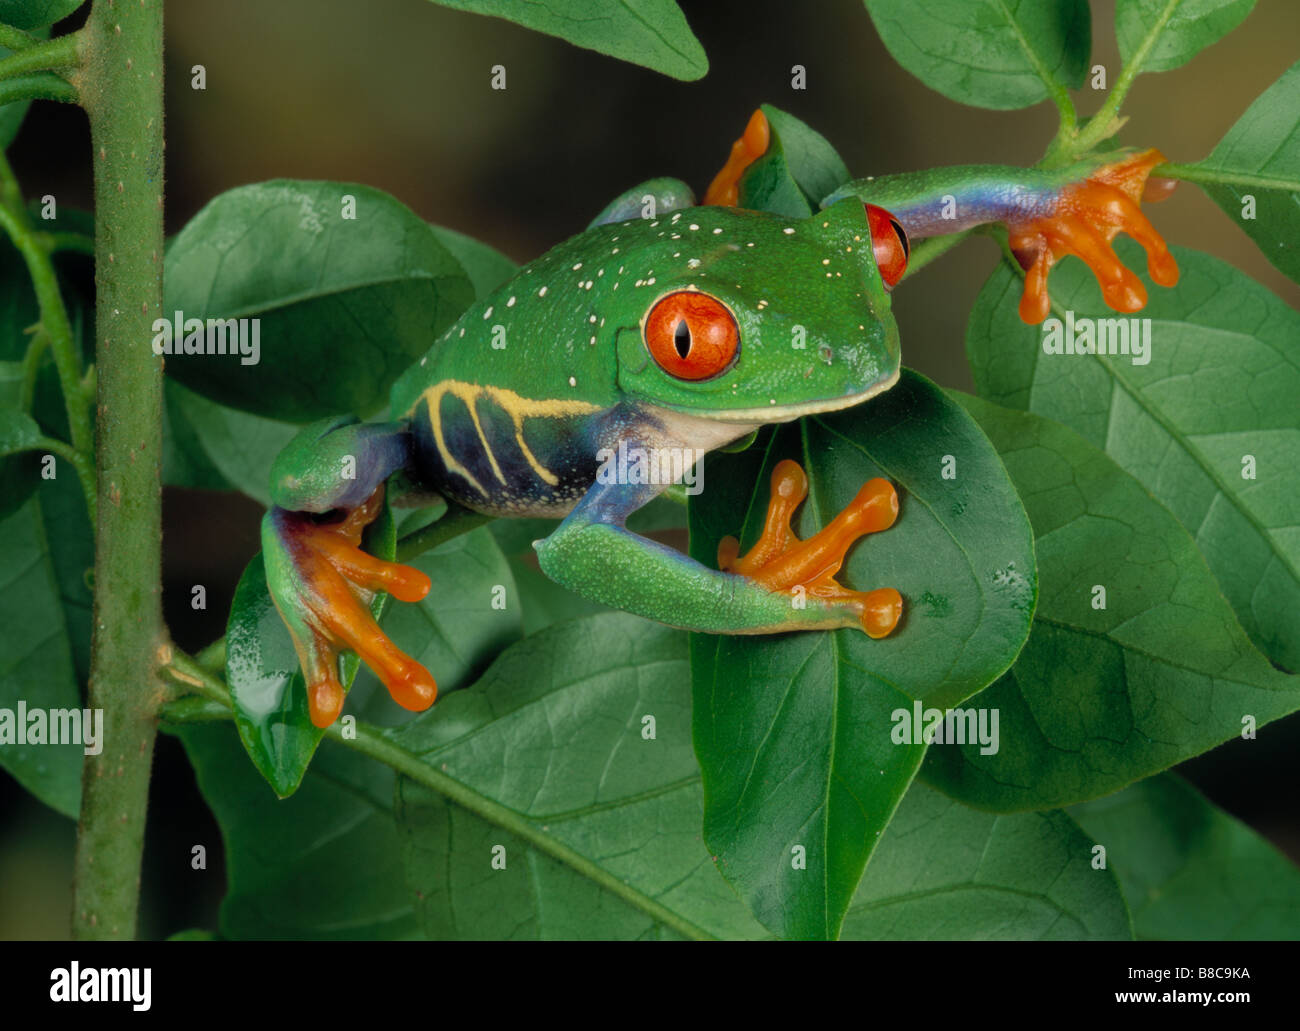 RED-EYED TREE FROG Stock Photo